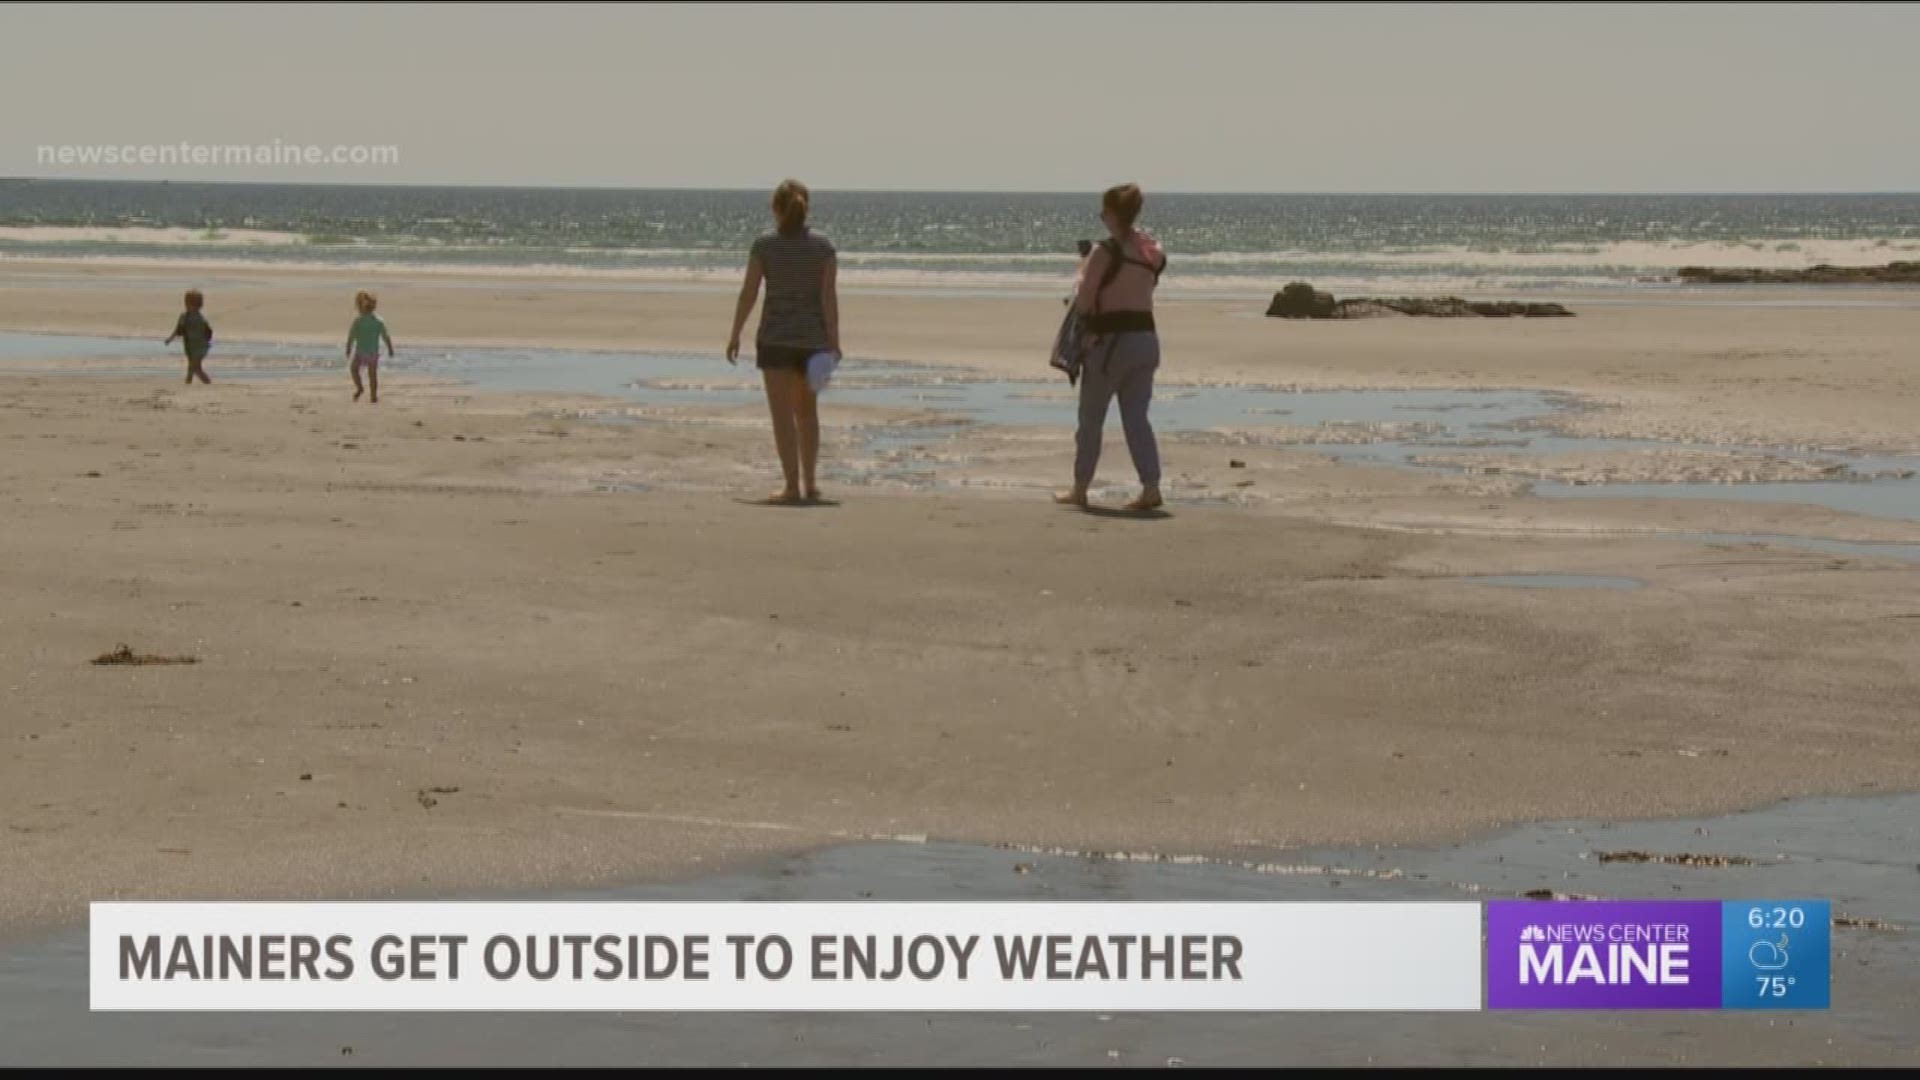 Mainers get outside to enjoy weather